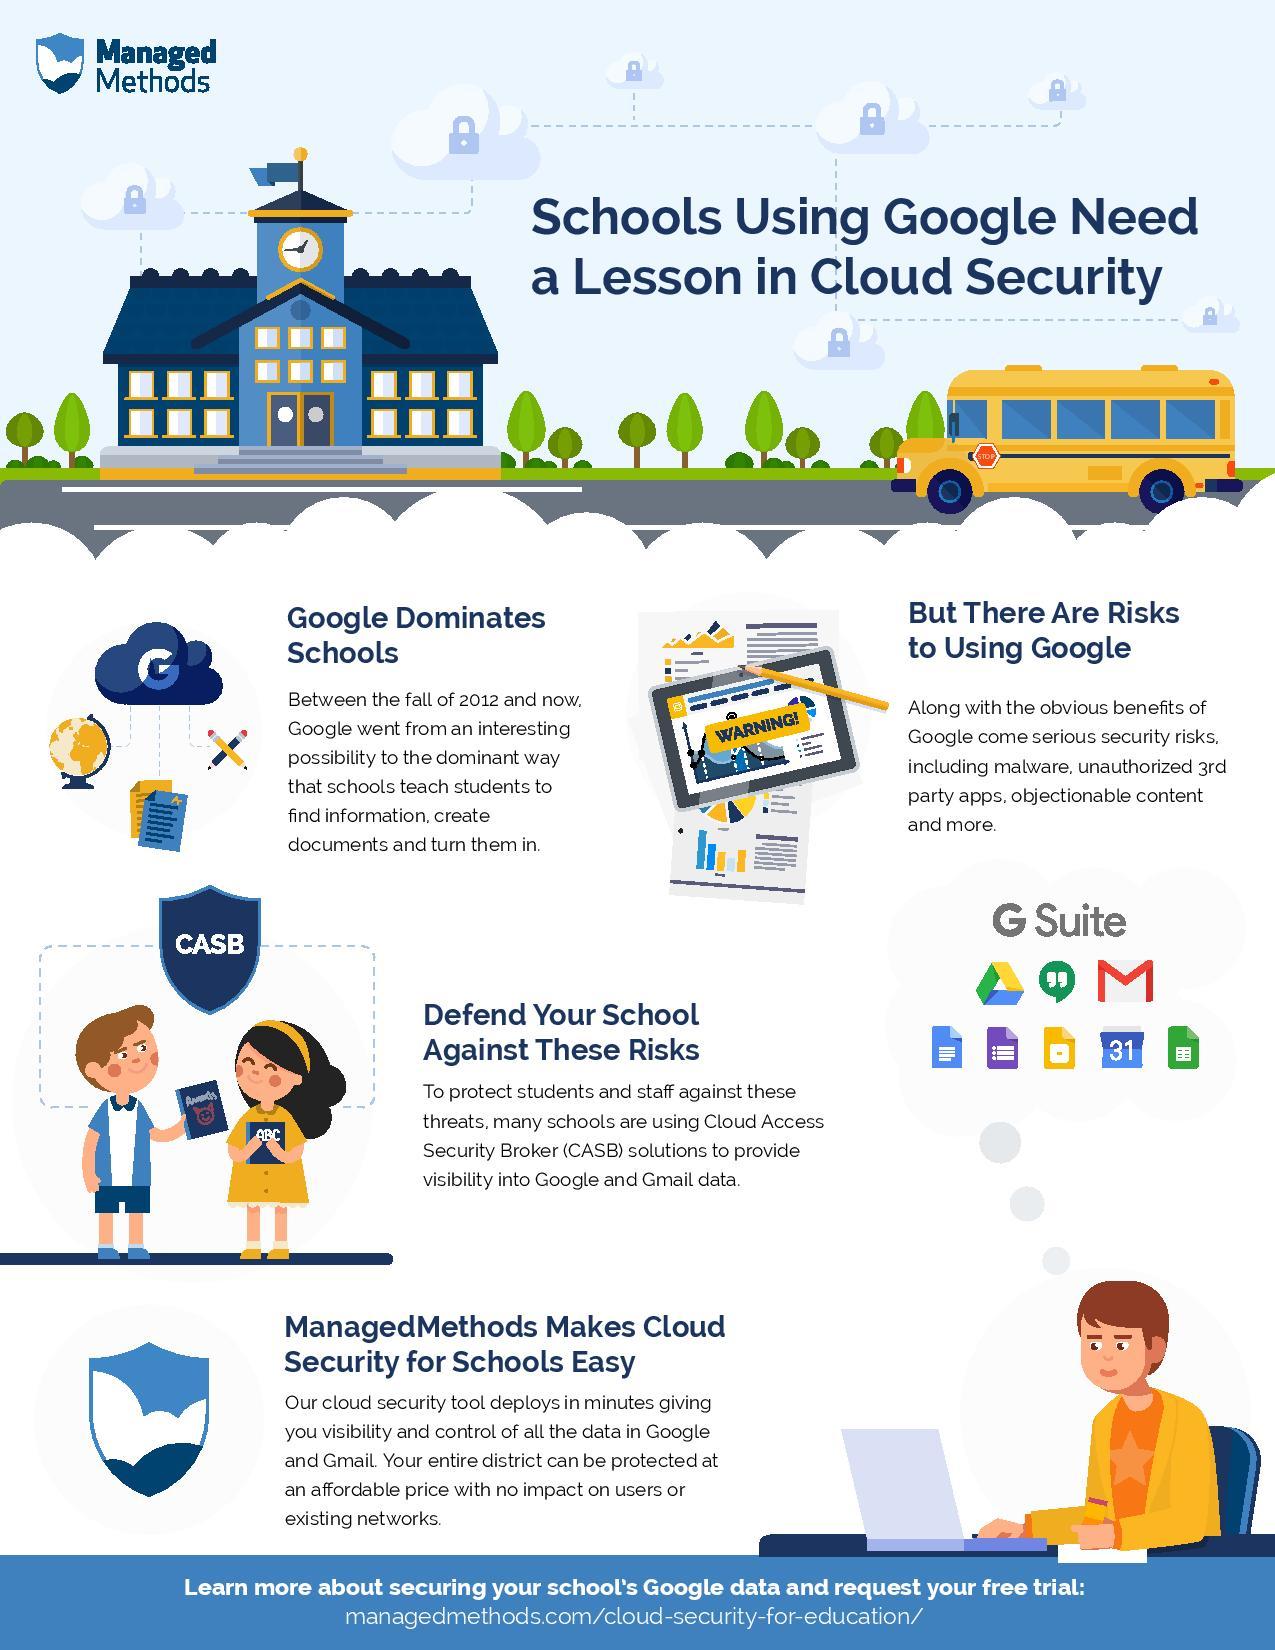 Schools Using Google Need a Lesson in Cloud Security Infographic